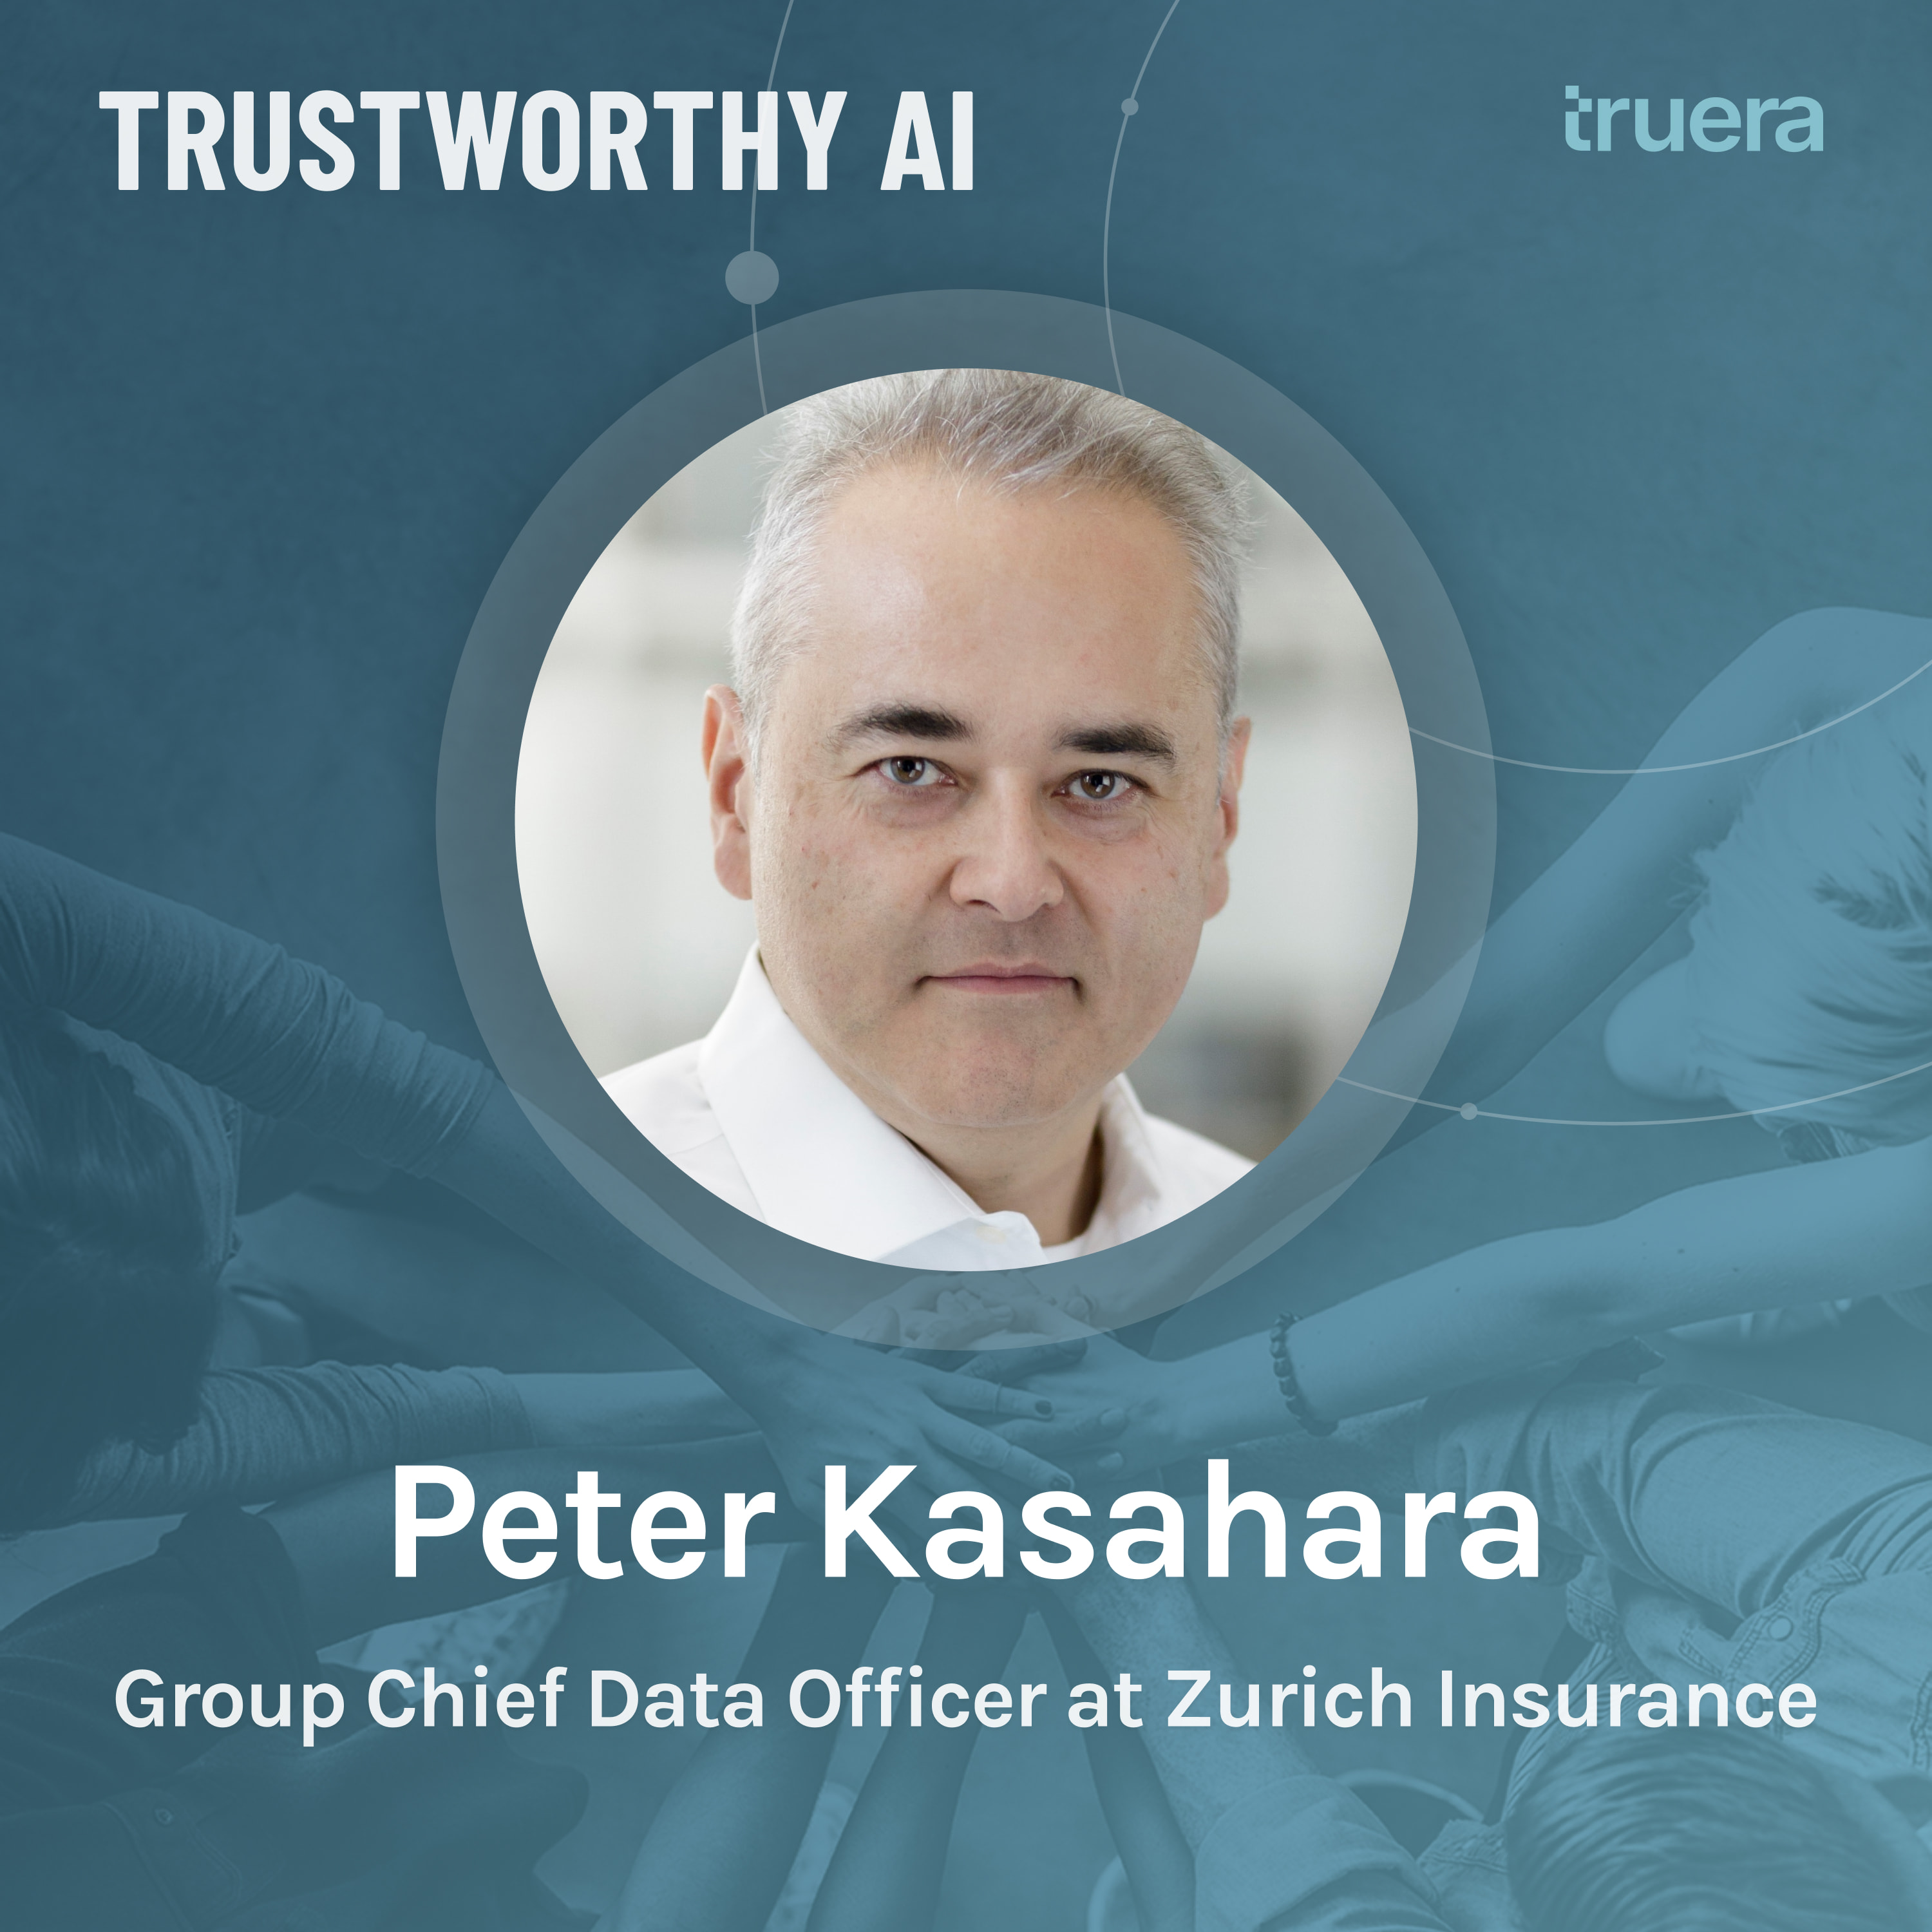 Responsible AI in Insurance with Peter Kasahara, Group Chief Data Officer, Zurich Insurance Company